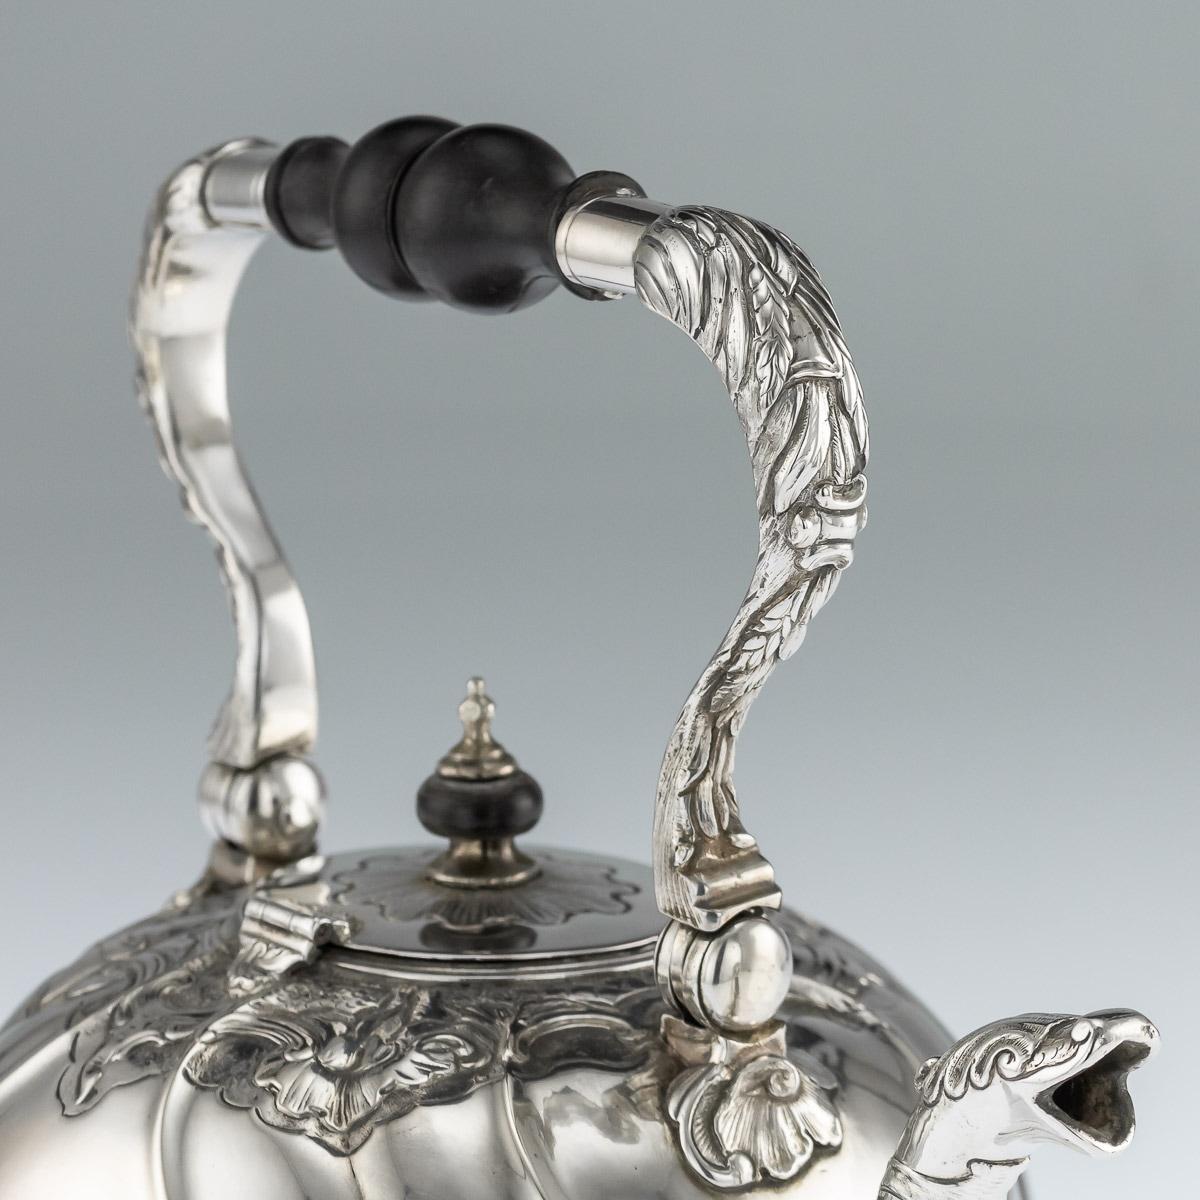 Antique Imperial Russian Solid Silver Tea Kettle on Stand, Moscow, circa 1761 6